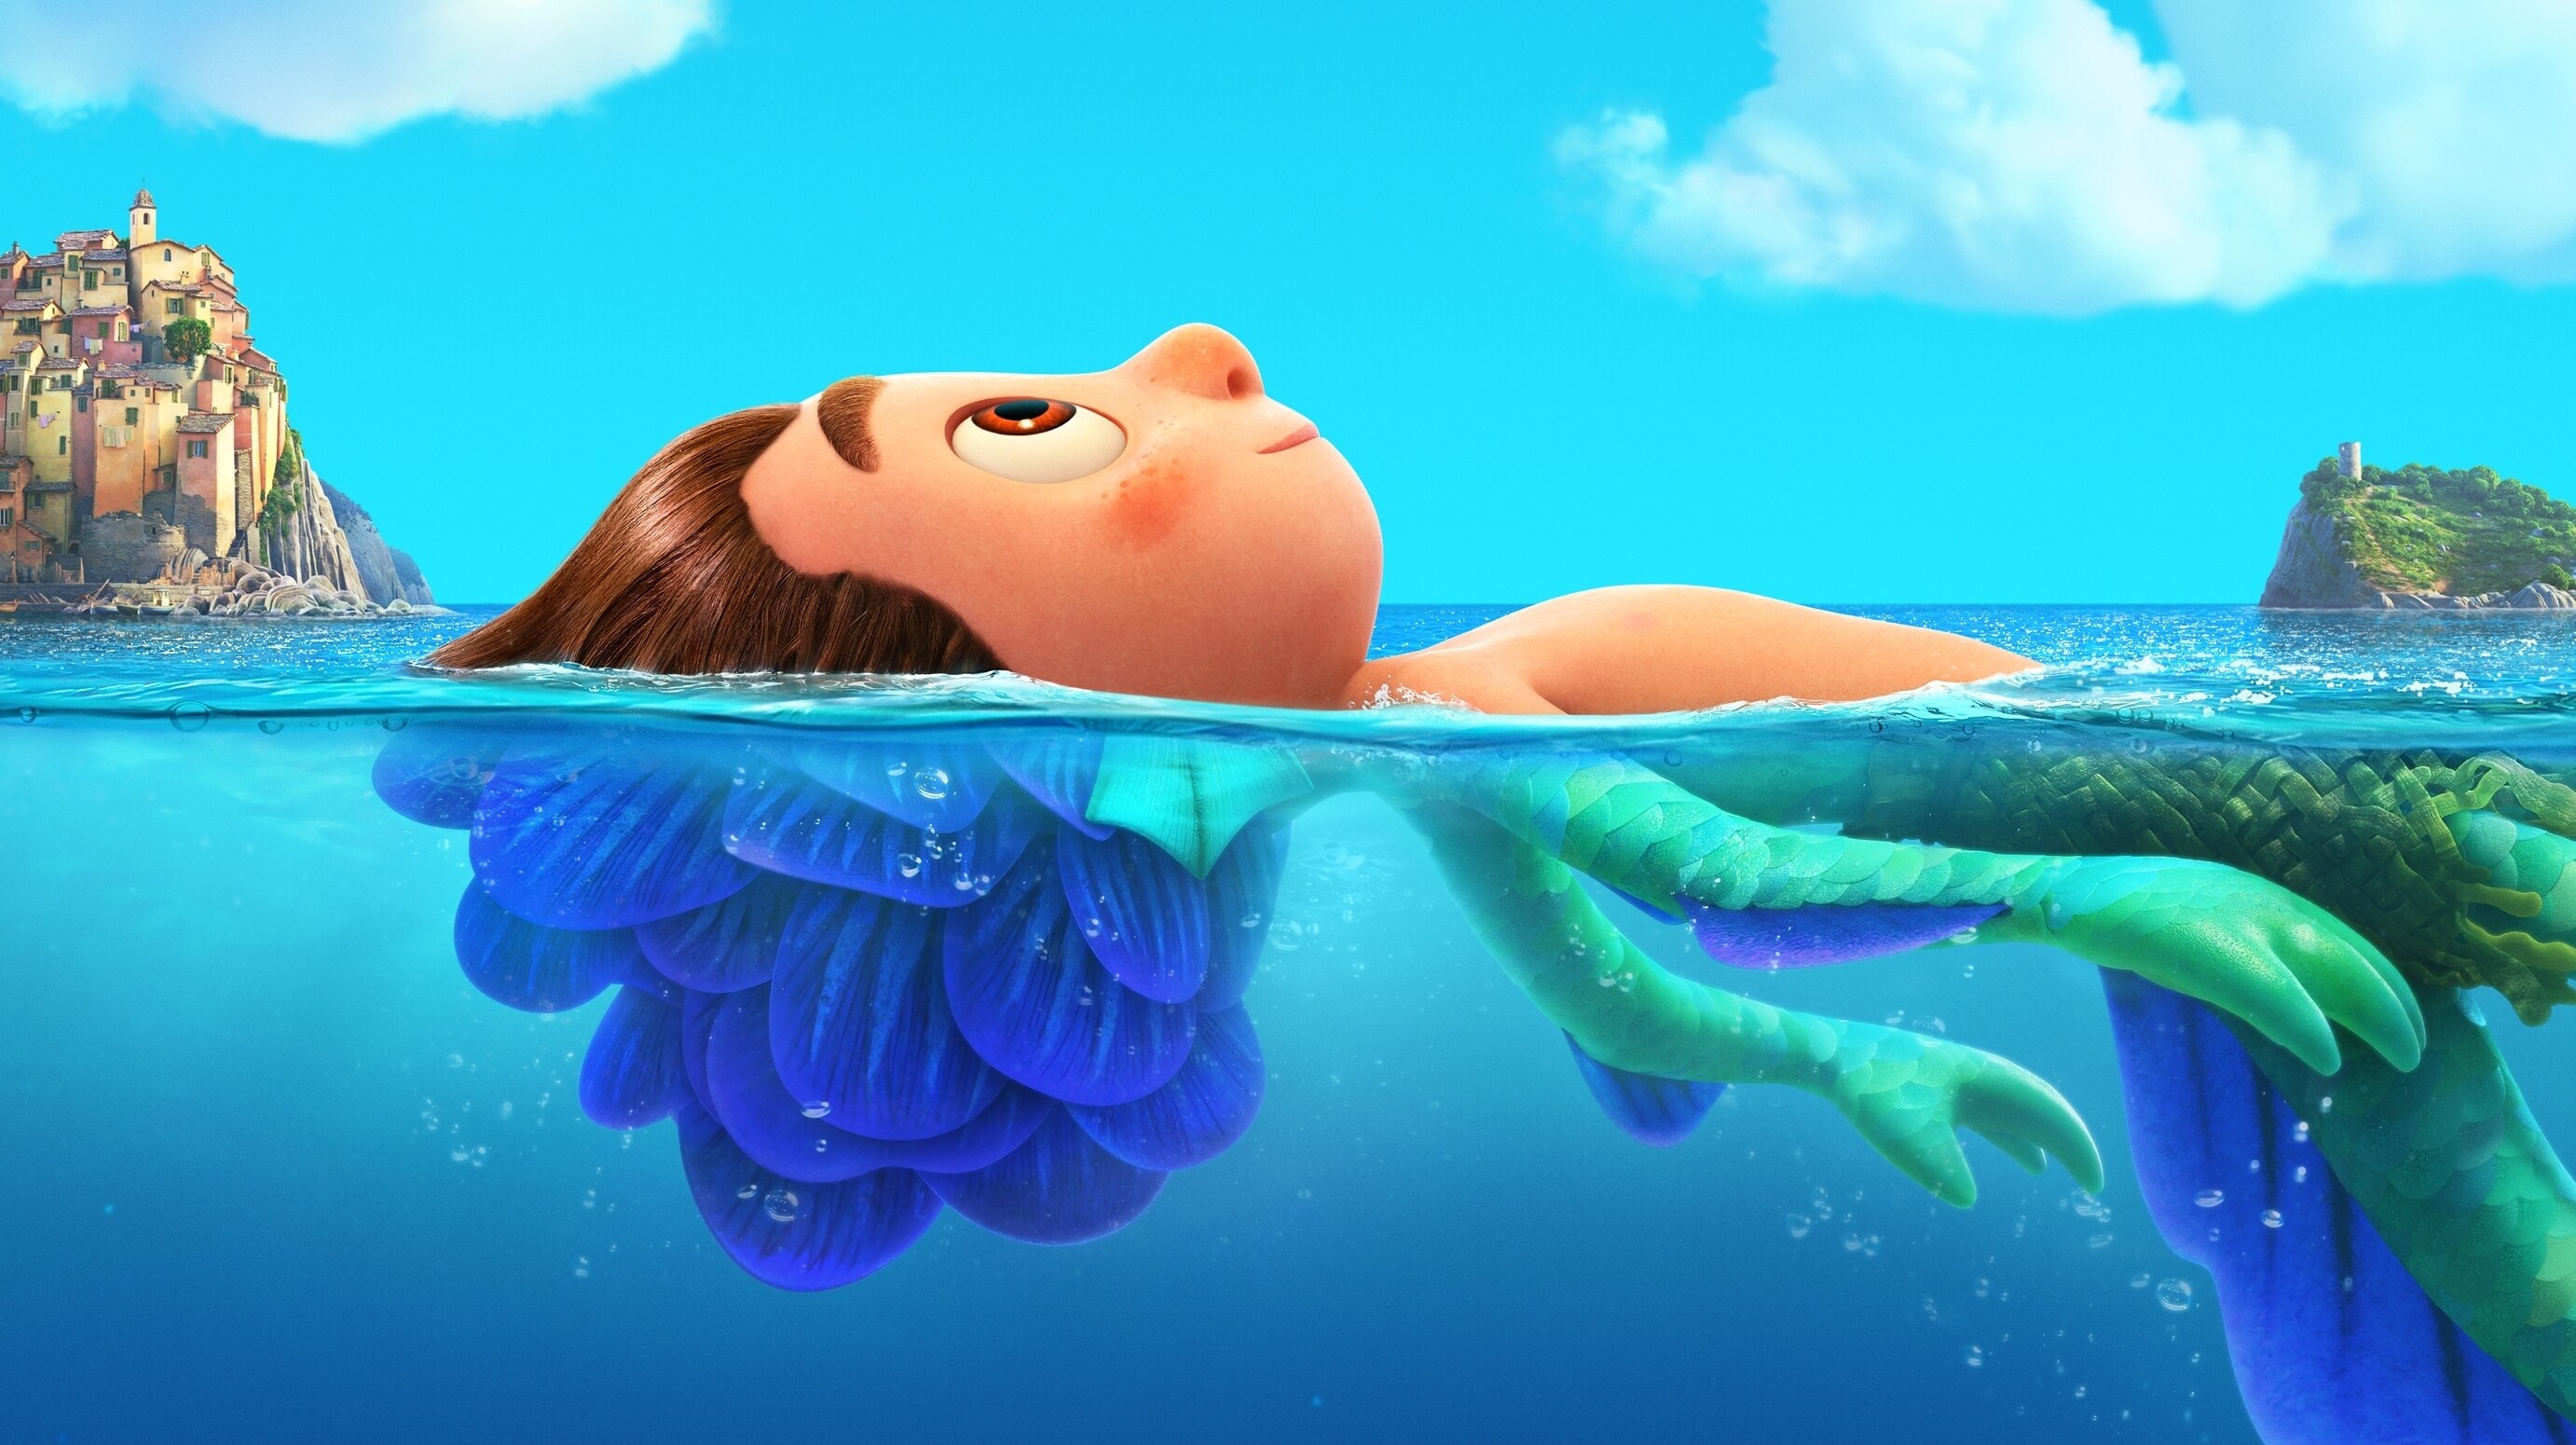 Watch a New Trailer for Disney and Pixar’s Luca